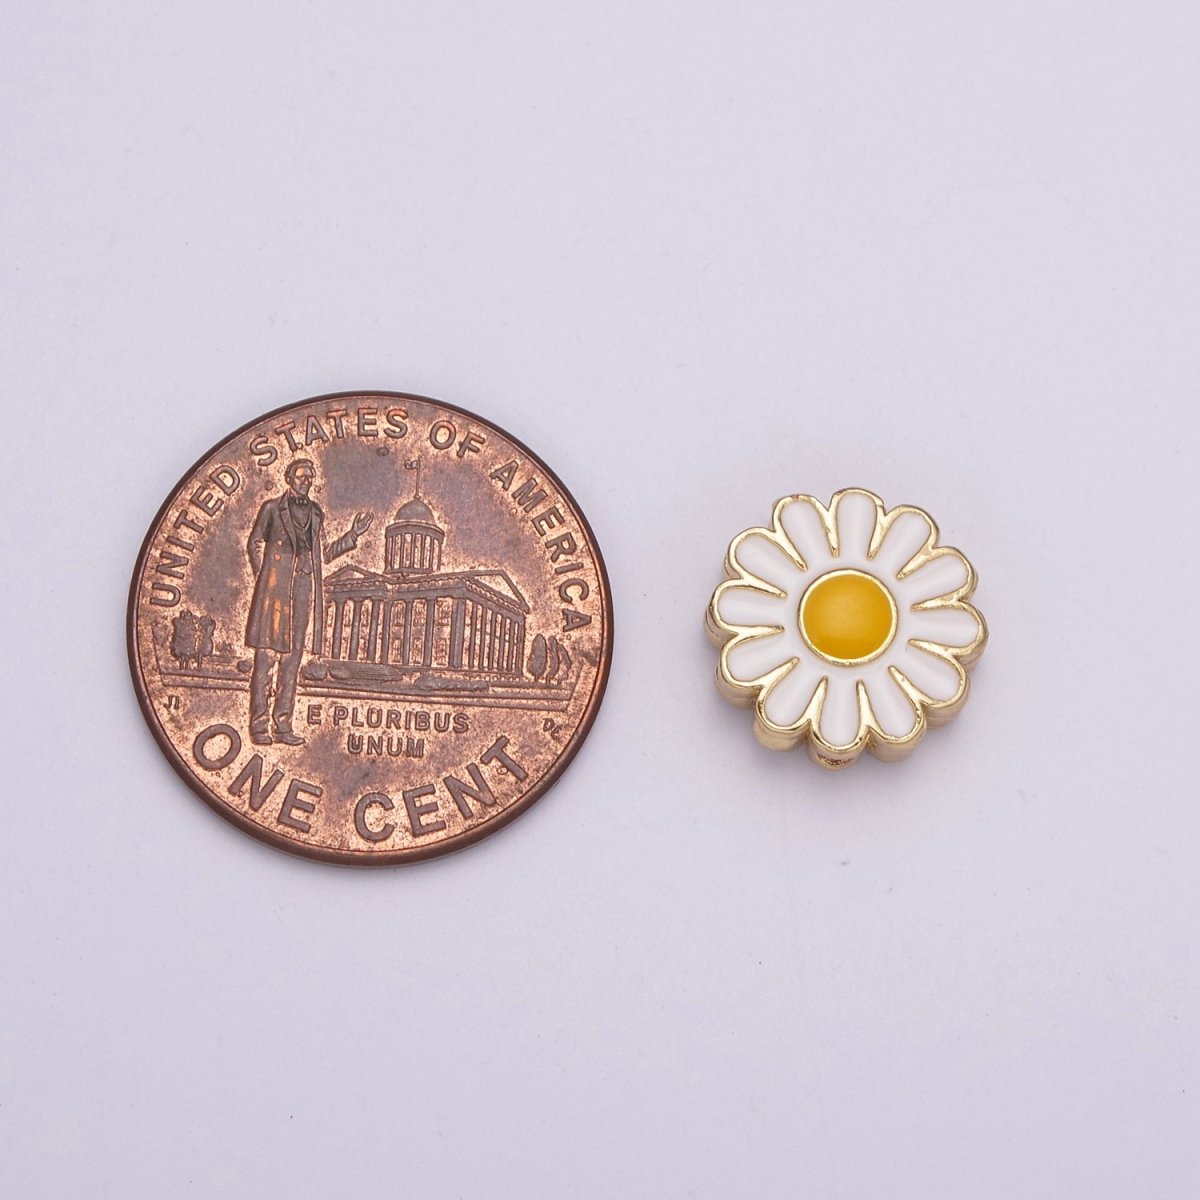 10mm Daisy Flower Bead Spacer White Mini Floral Nature Gold Filled Art Jewelry Making Beads B-765 - DLUXCA